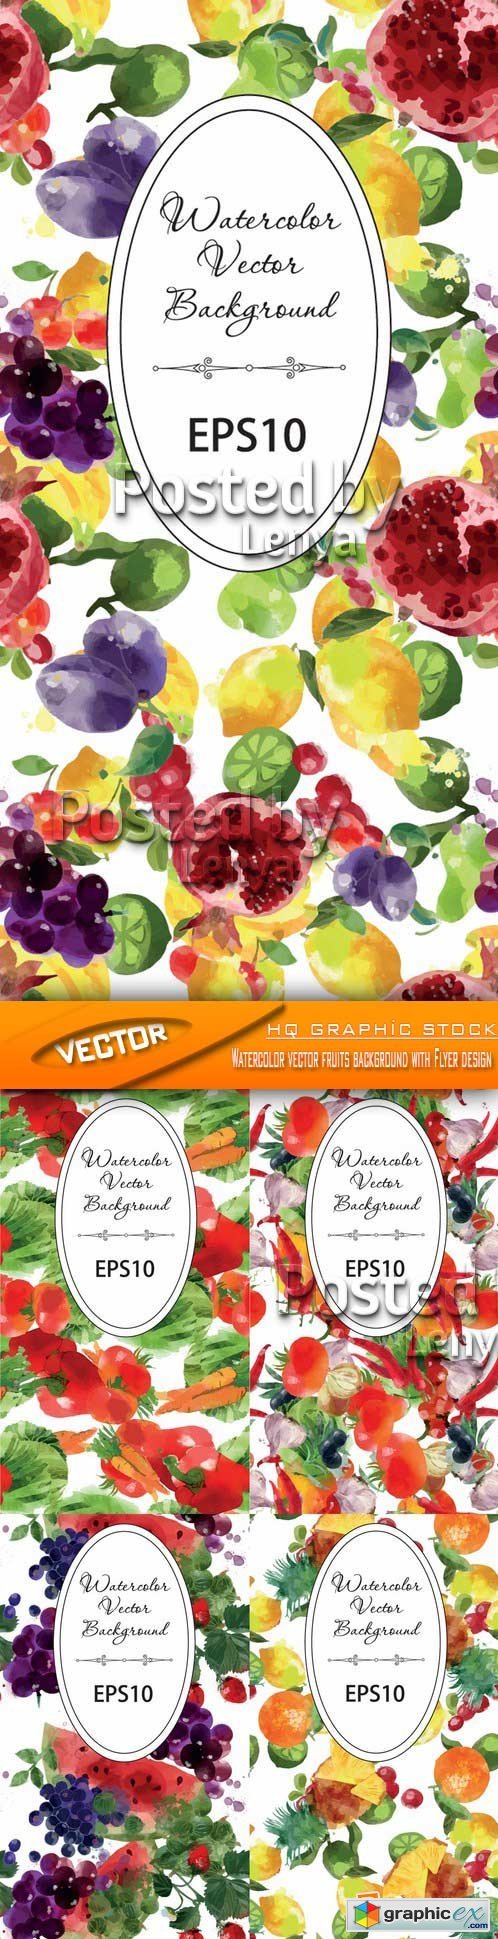 Stock Vector - Watercolor vector fruits background with Flyer design